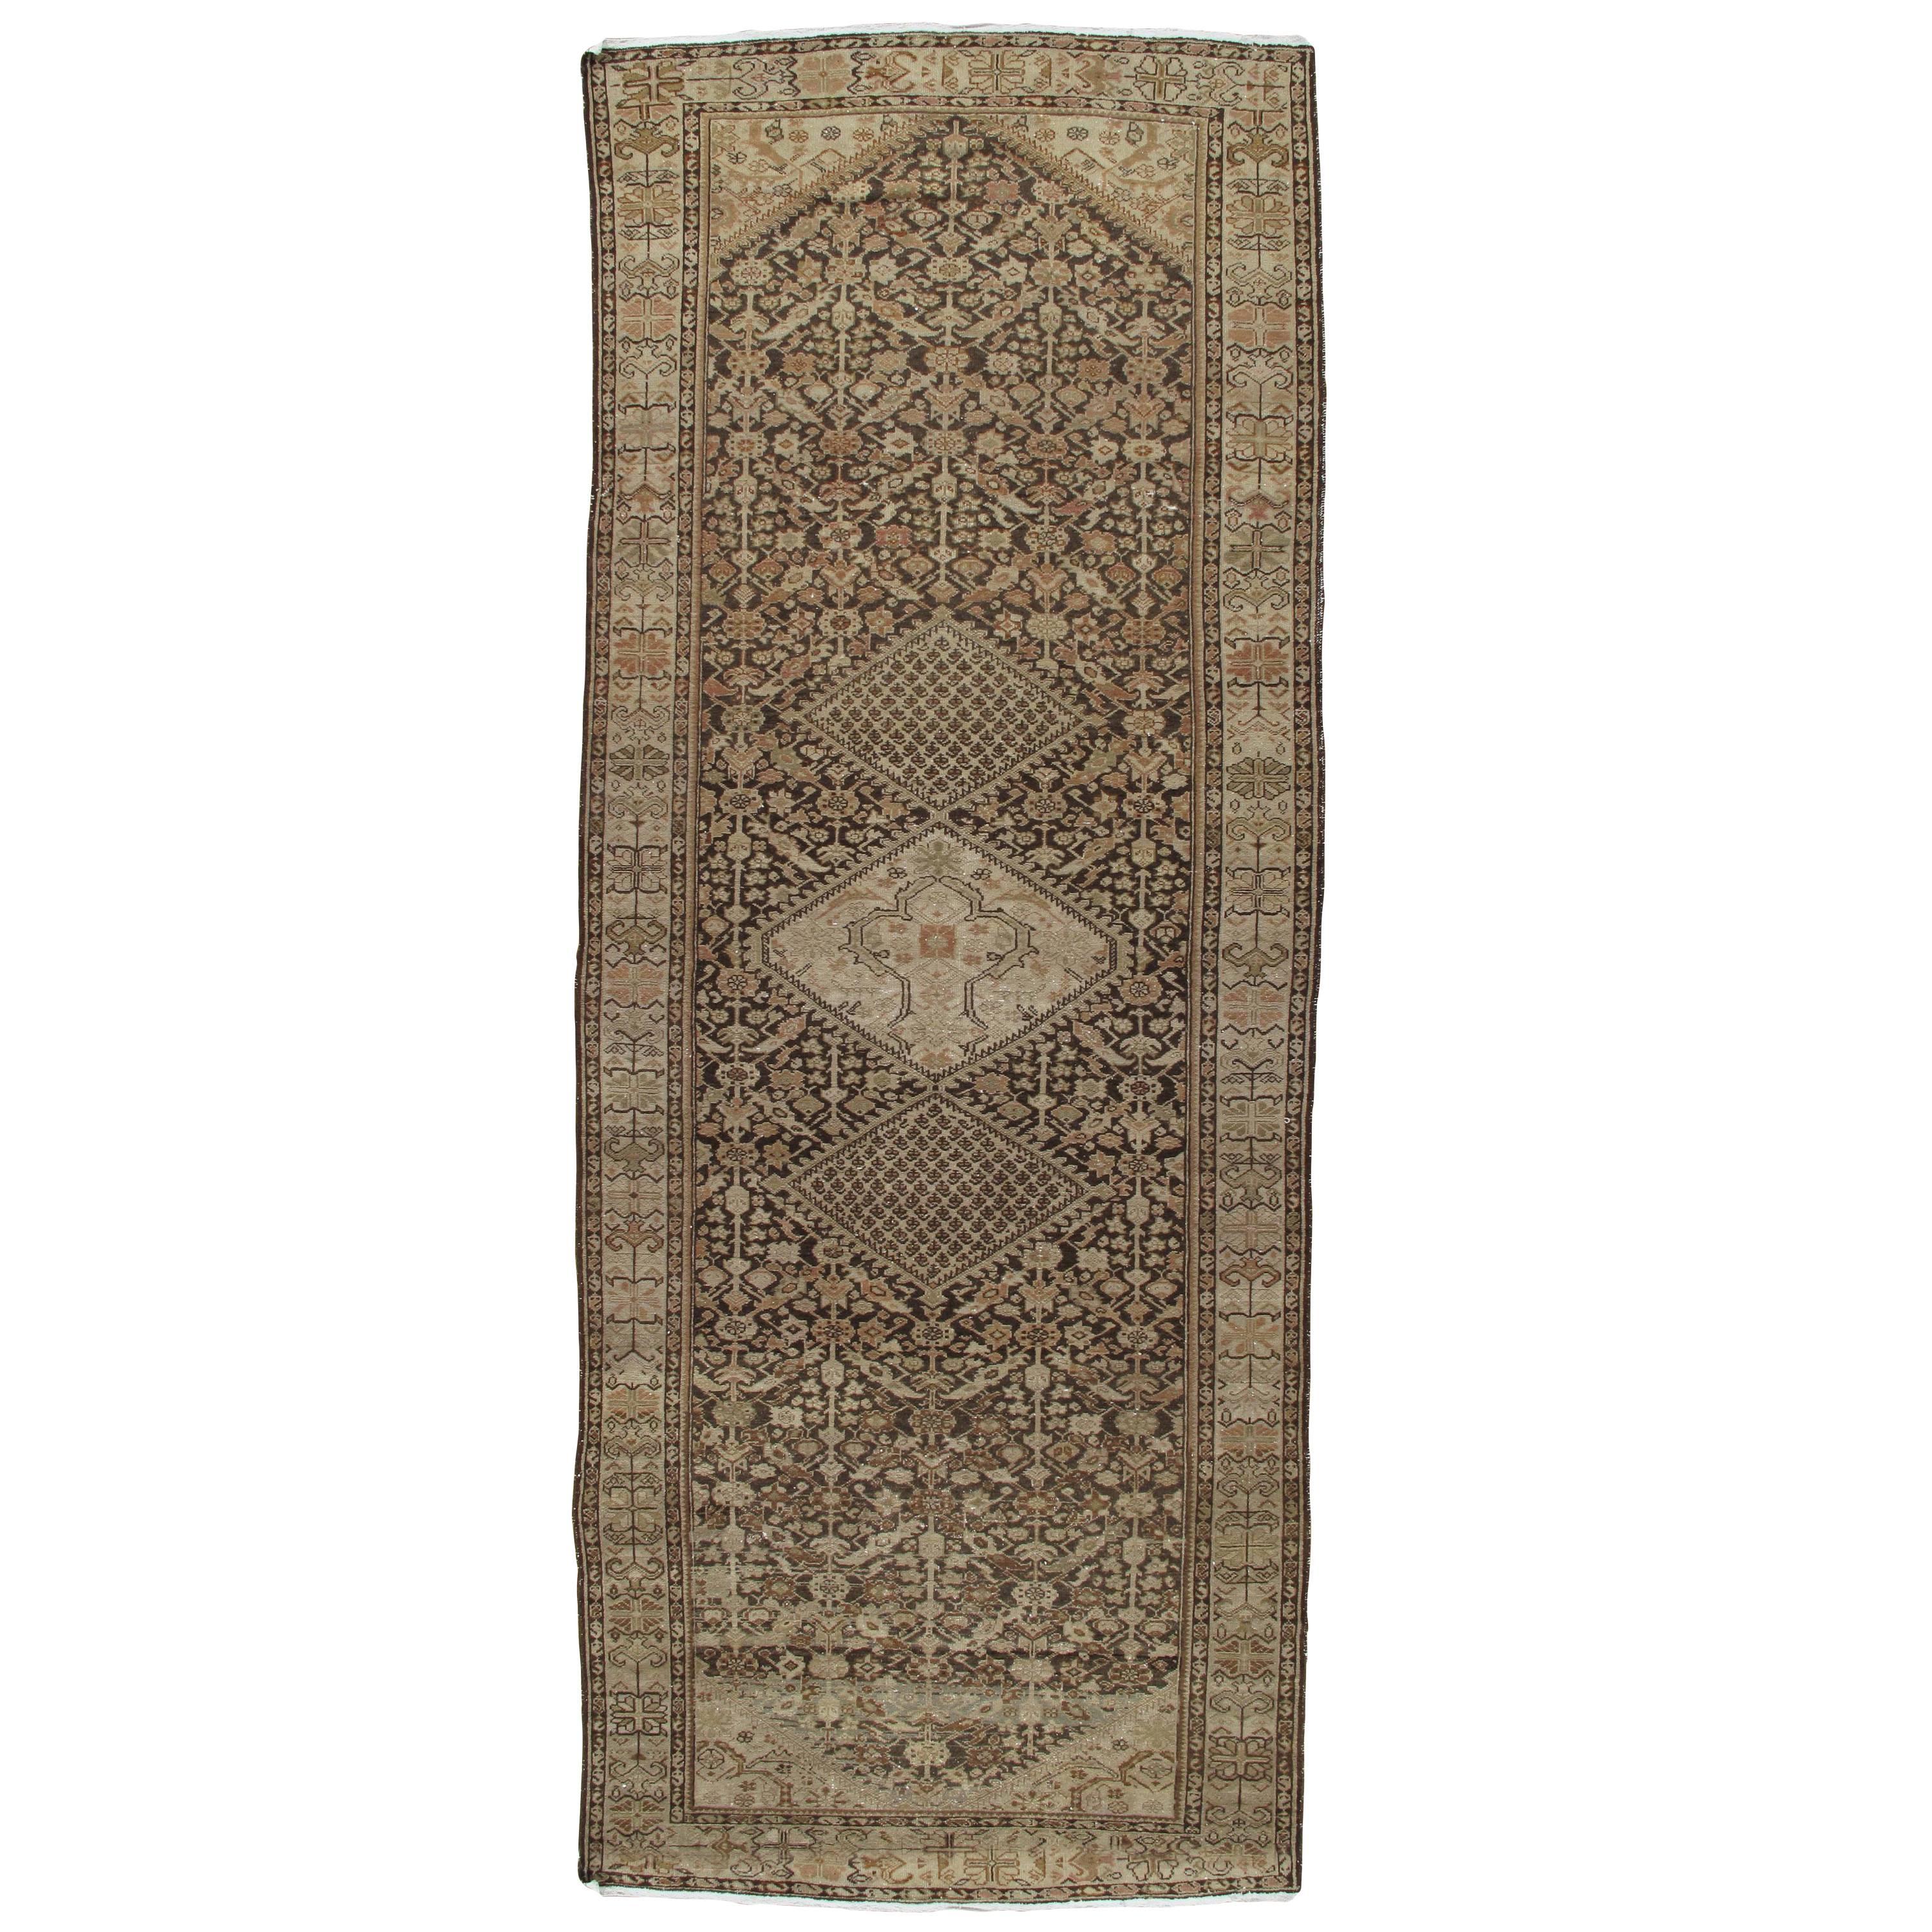 Antique Persian Malayer Carpet, Handmade Oriental Rug, Ivory, Taupe, Brown, Fine For Sale